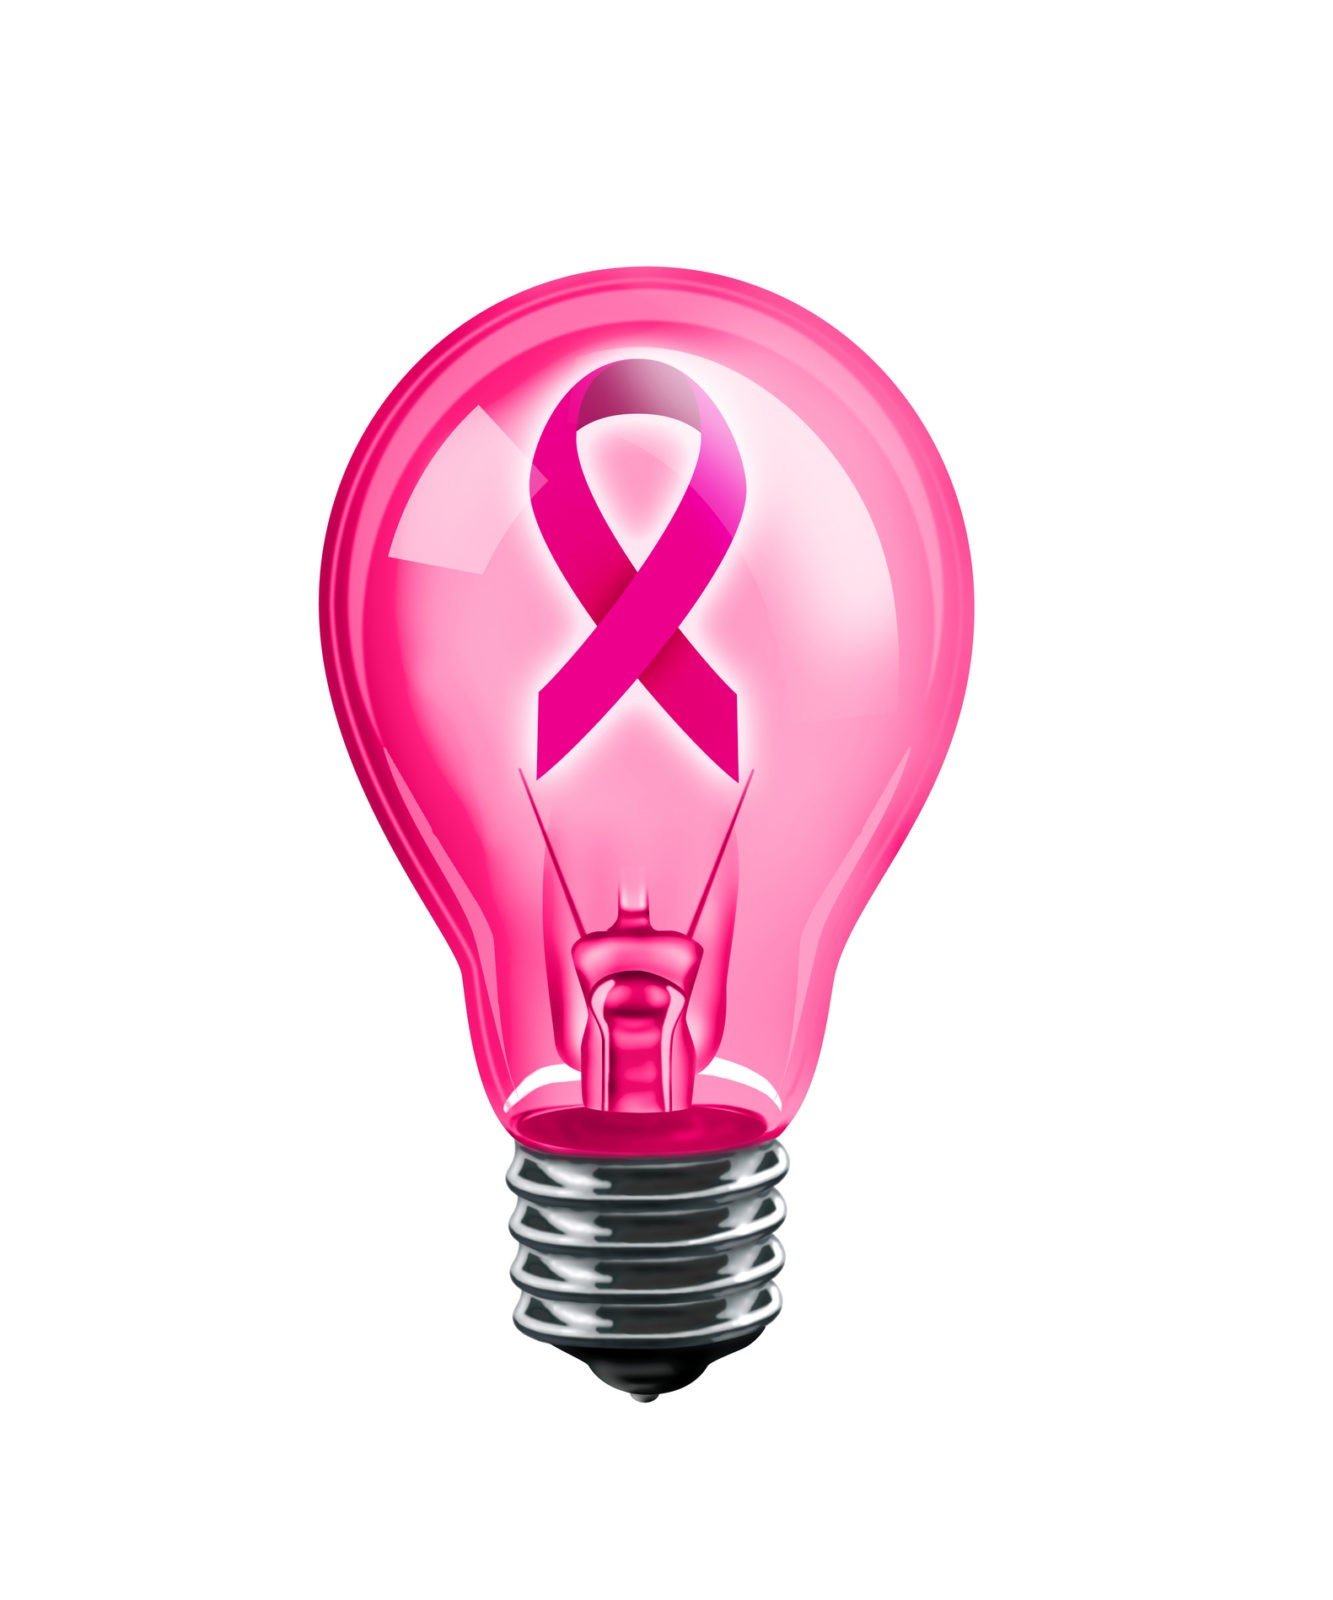 Think Pink – It’s Breast Cancer Awareness Month!